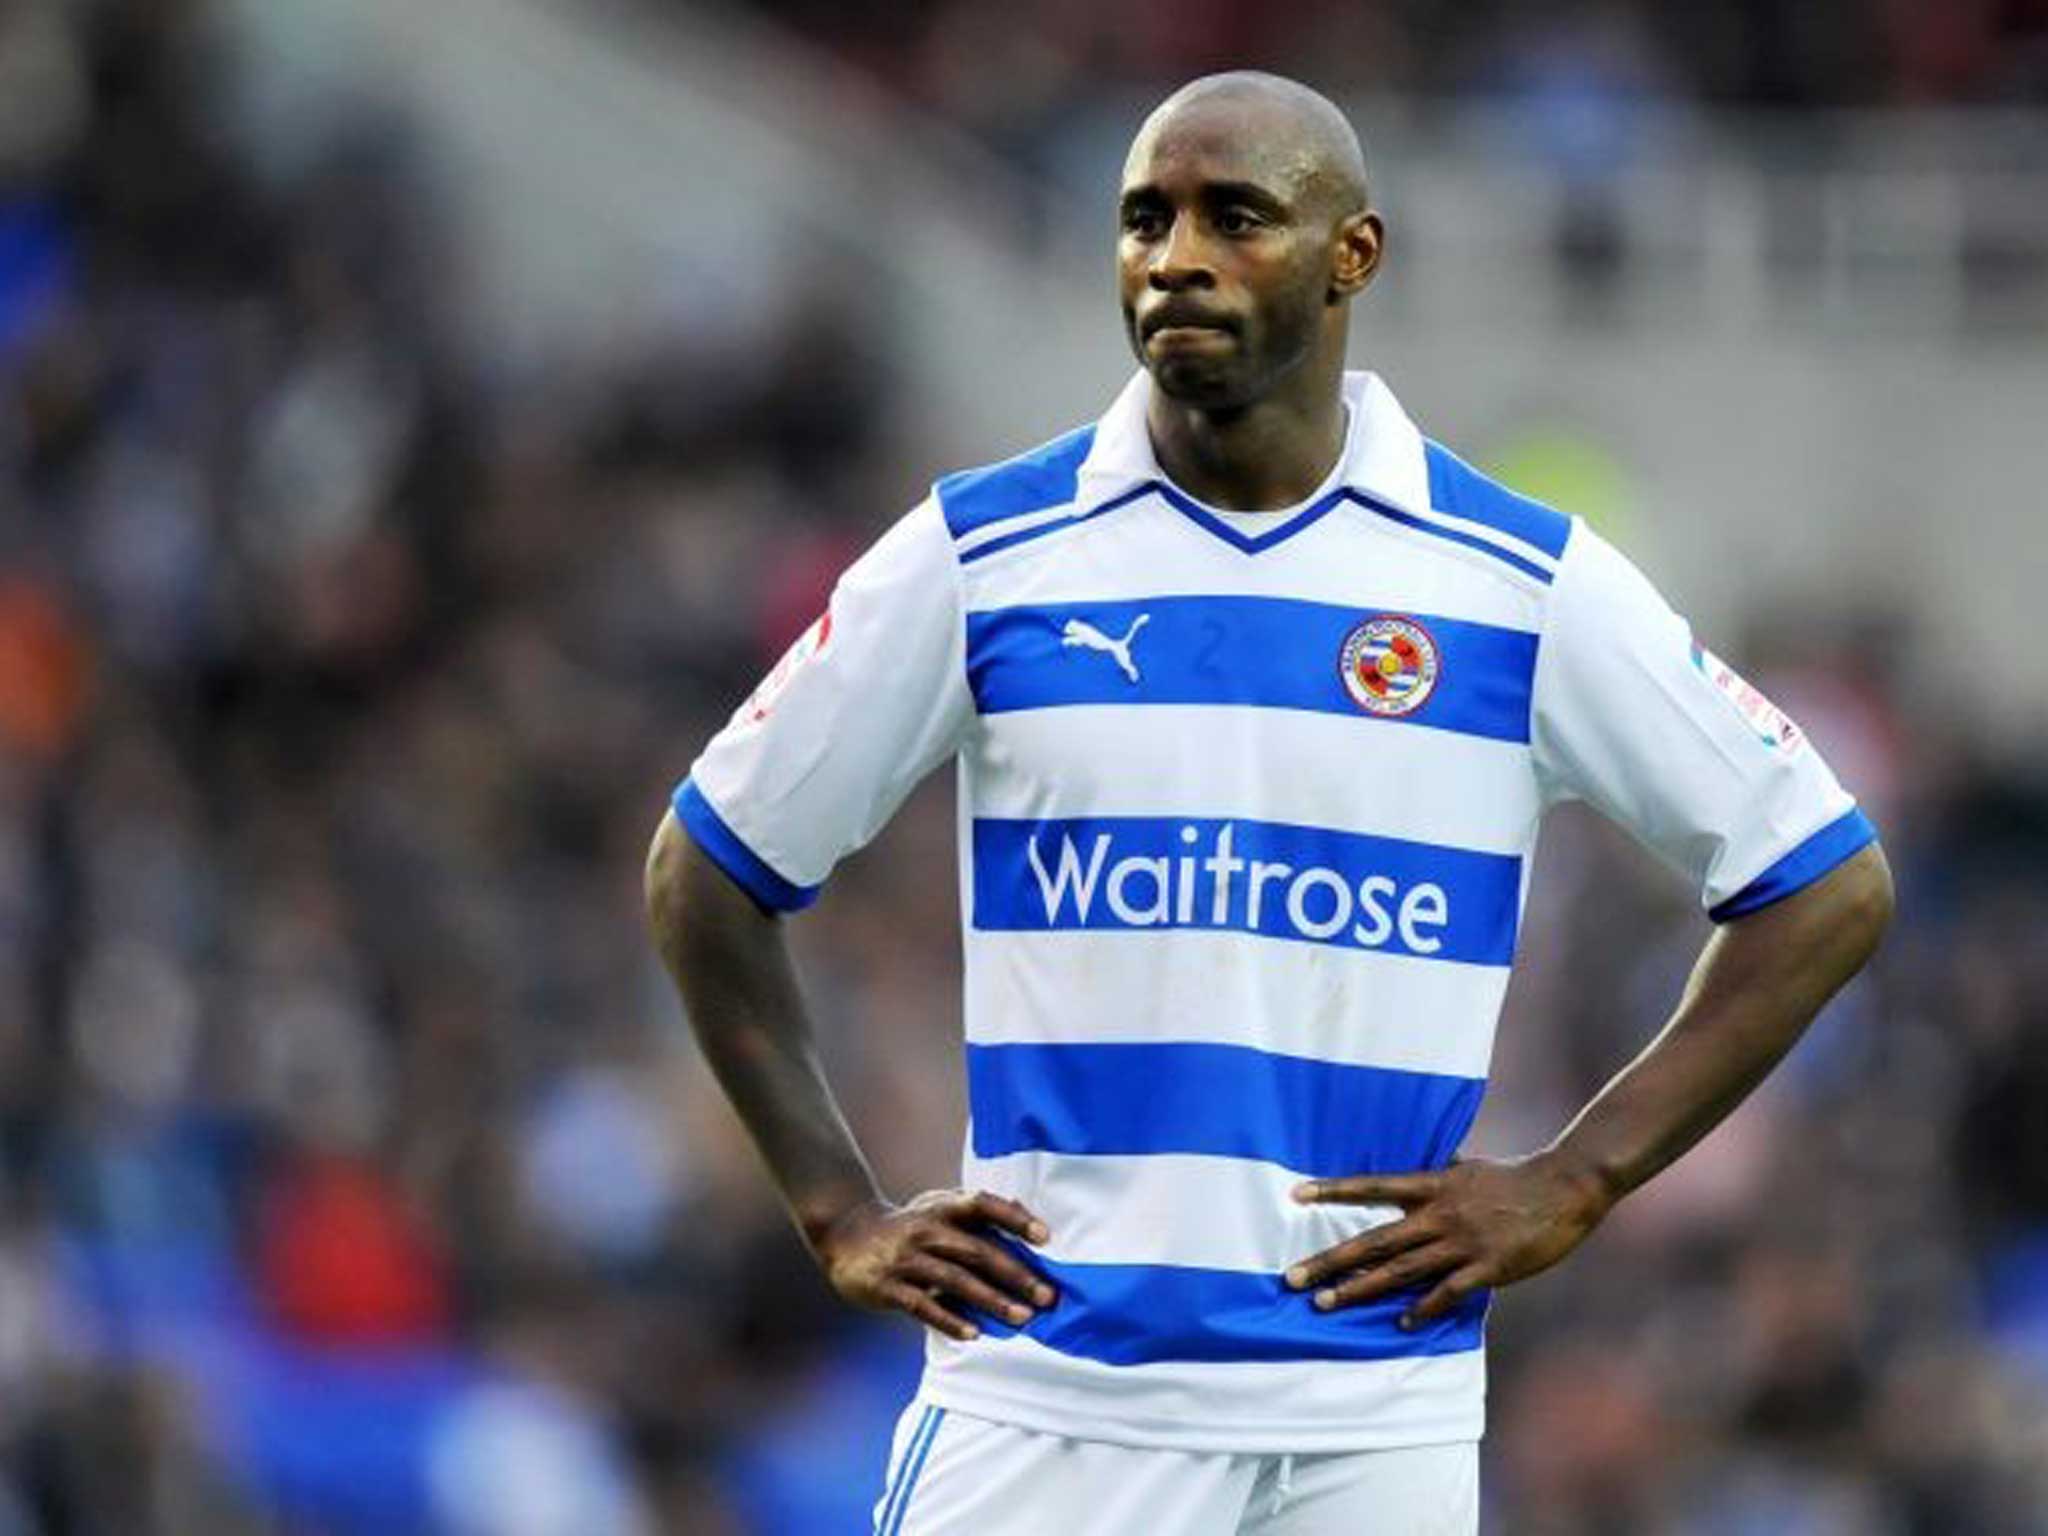 Ant-racism campaigner Jason Roberts was outspoken in his criticism of the LMA